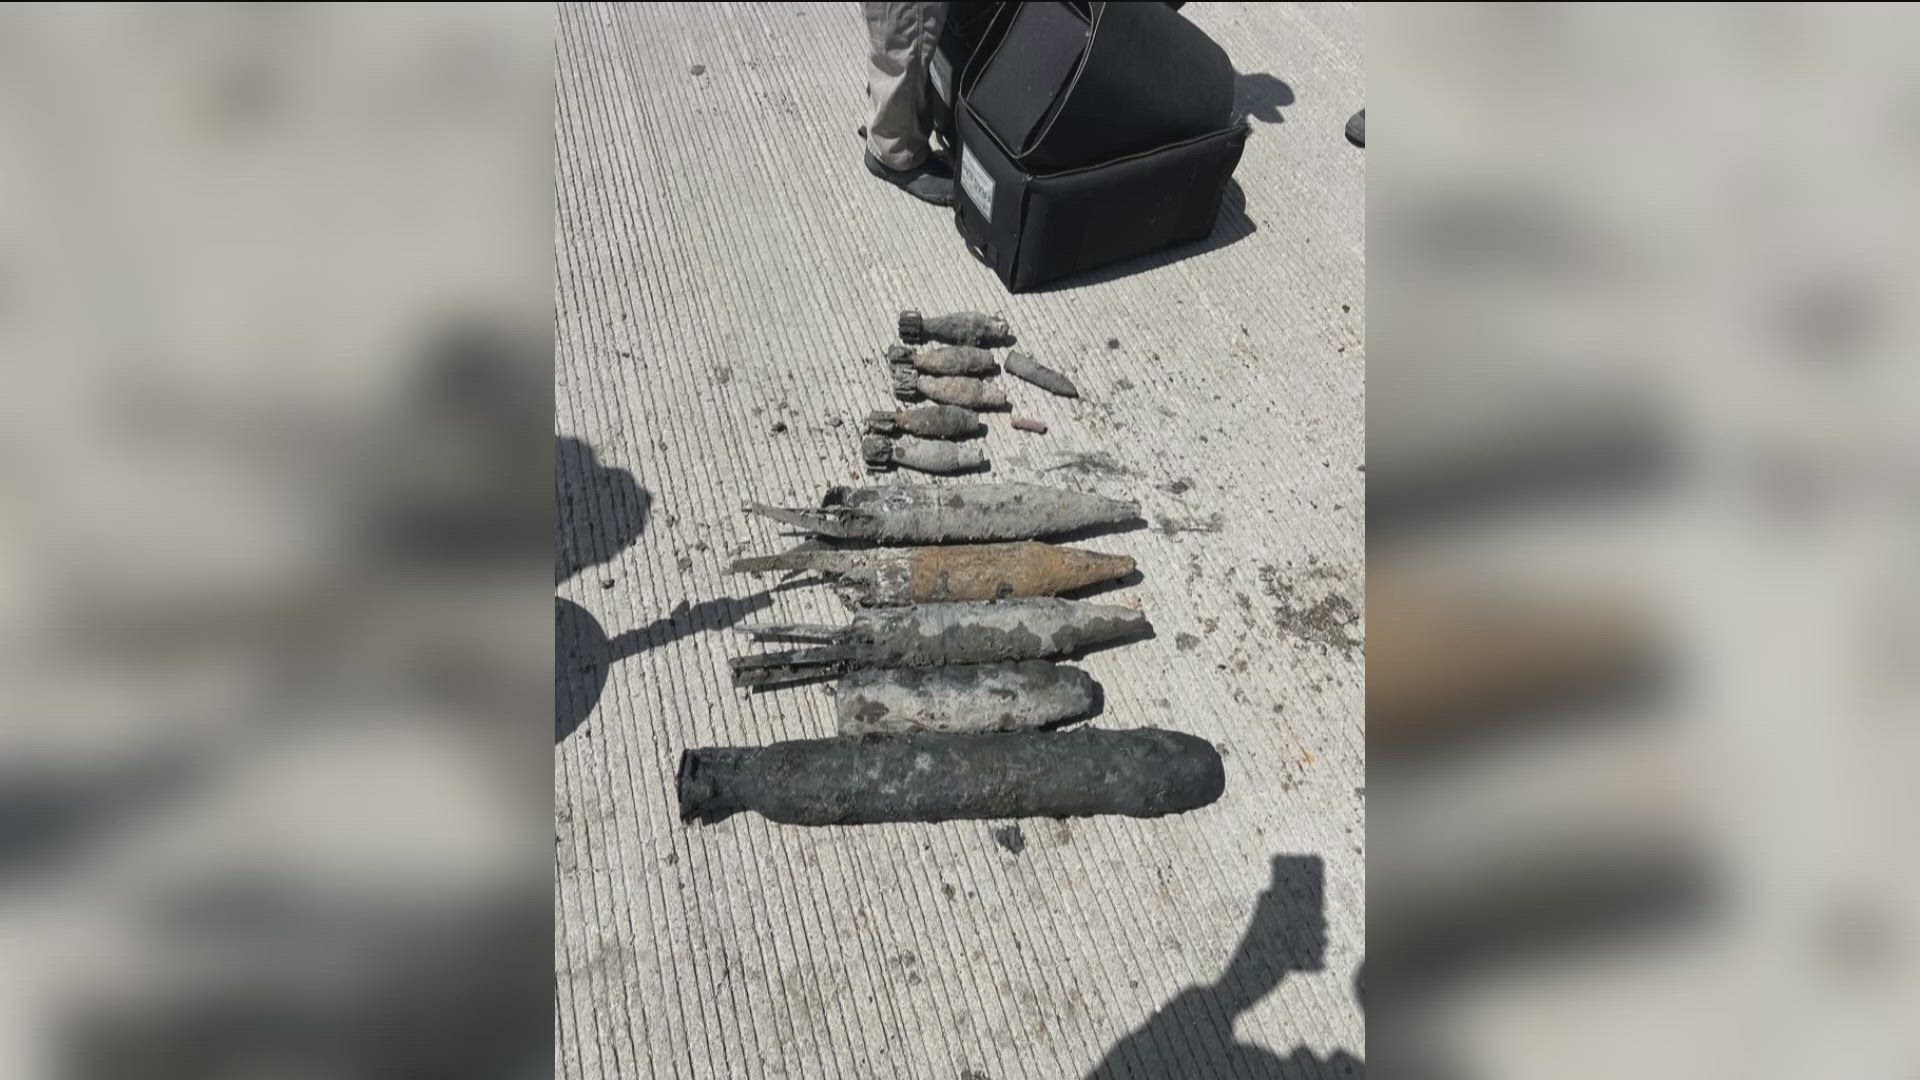 Just a week prior, magnet fishers had found similar explosives in the same area.